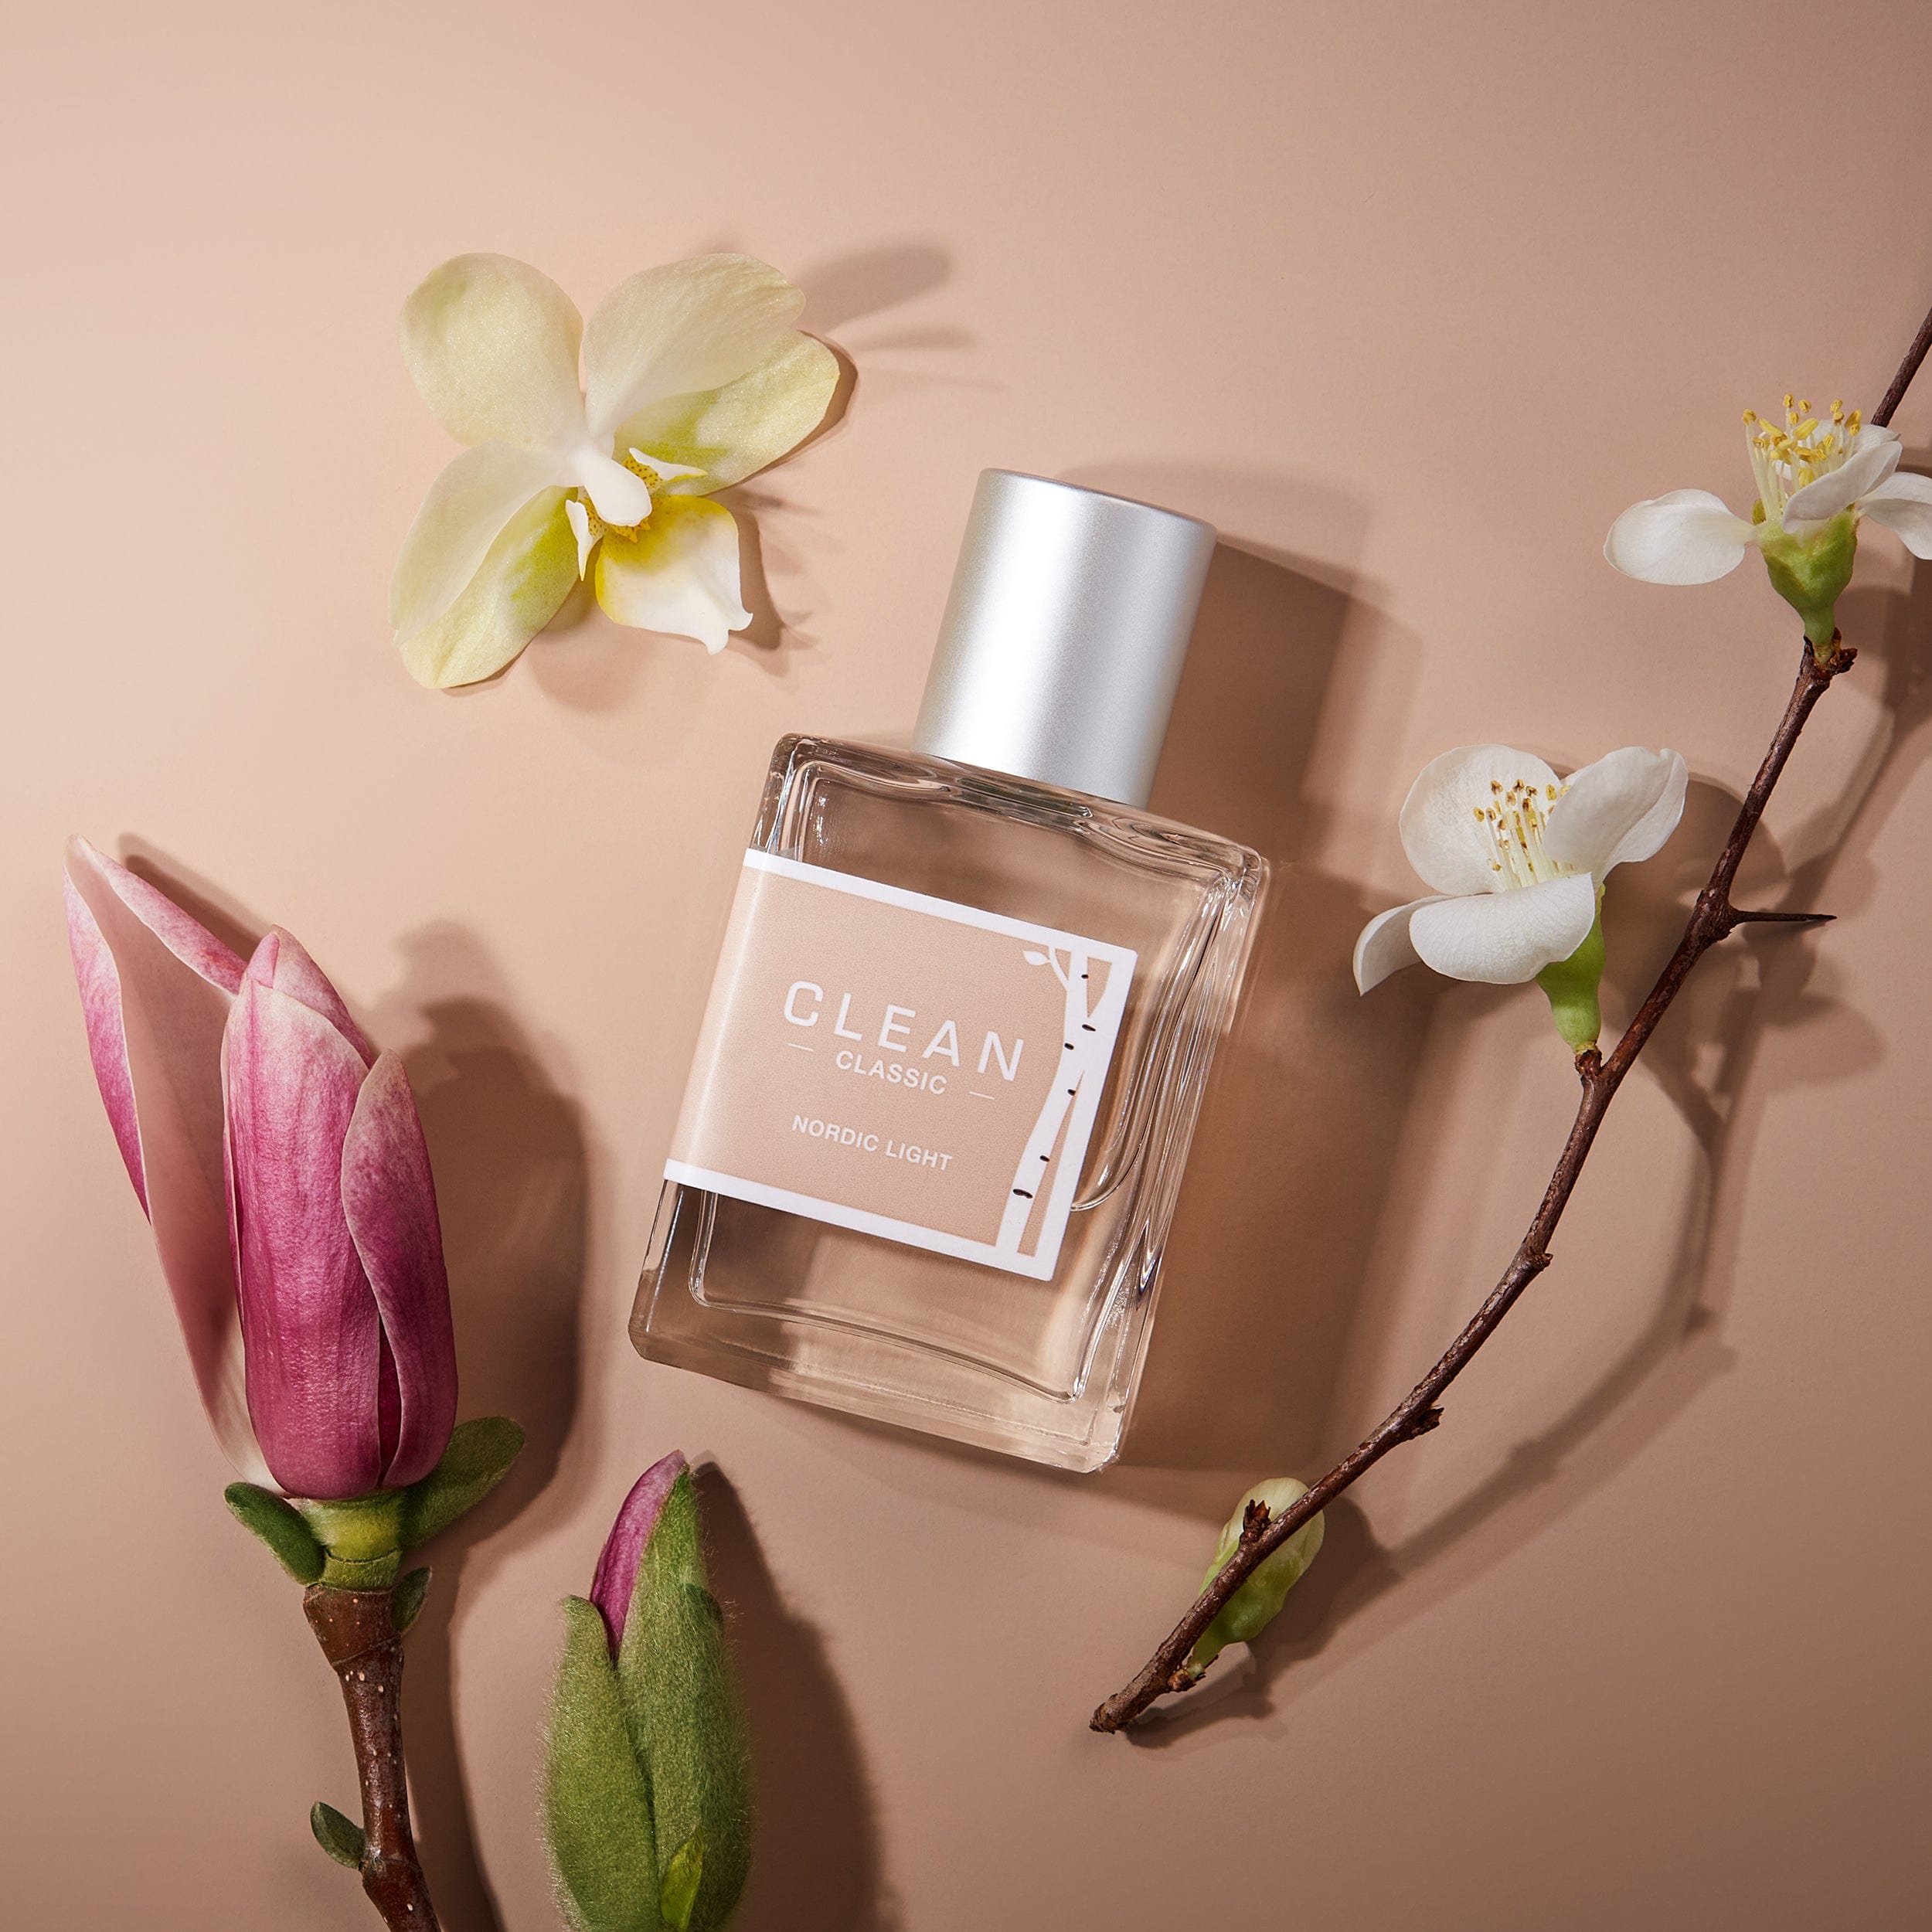 Clean Classic Nordic Light fragrance with flowers